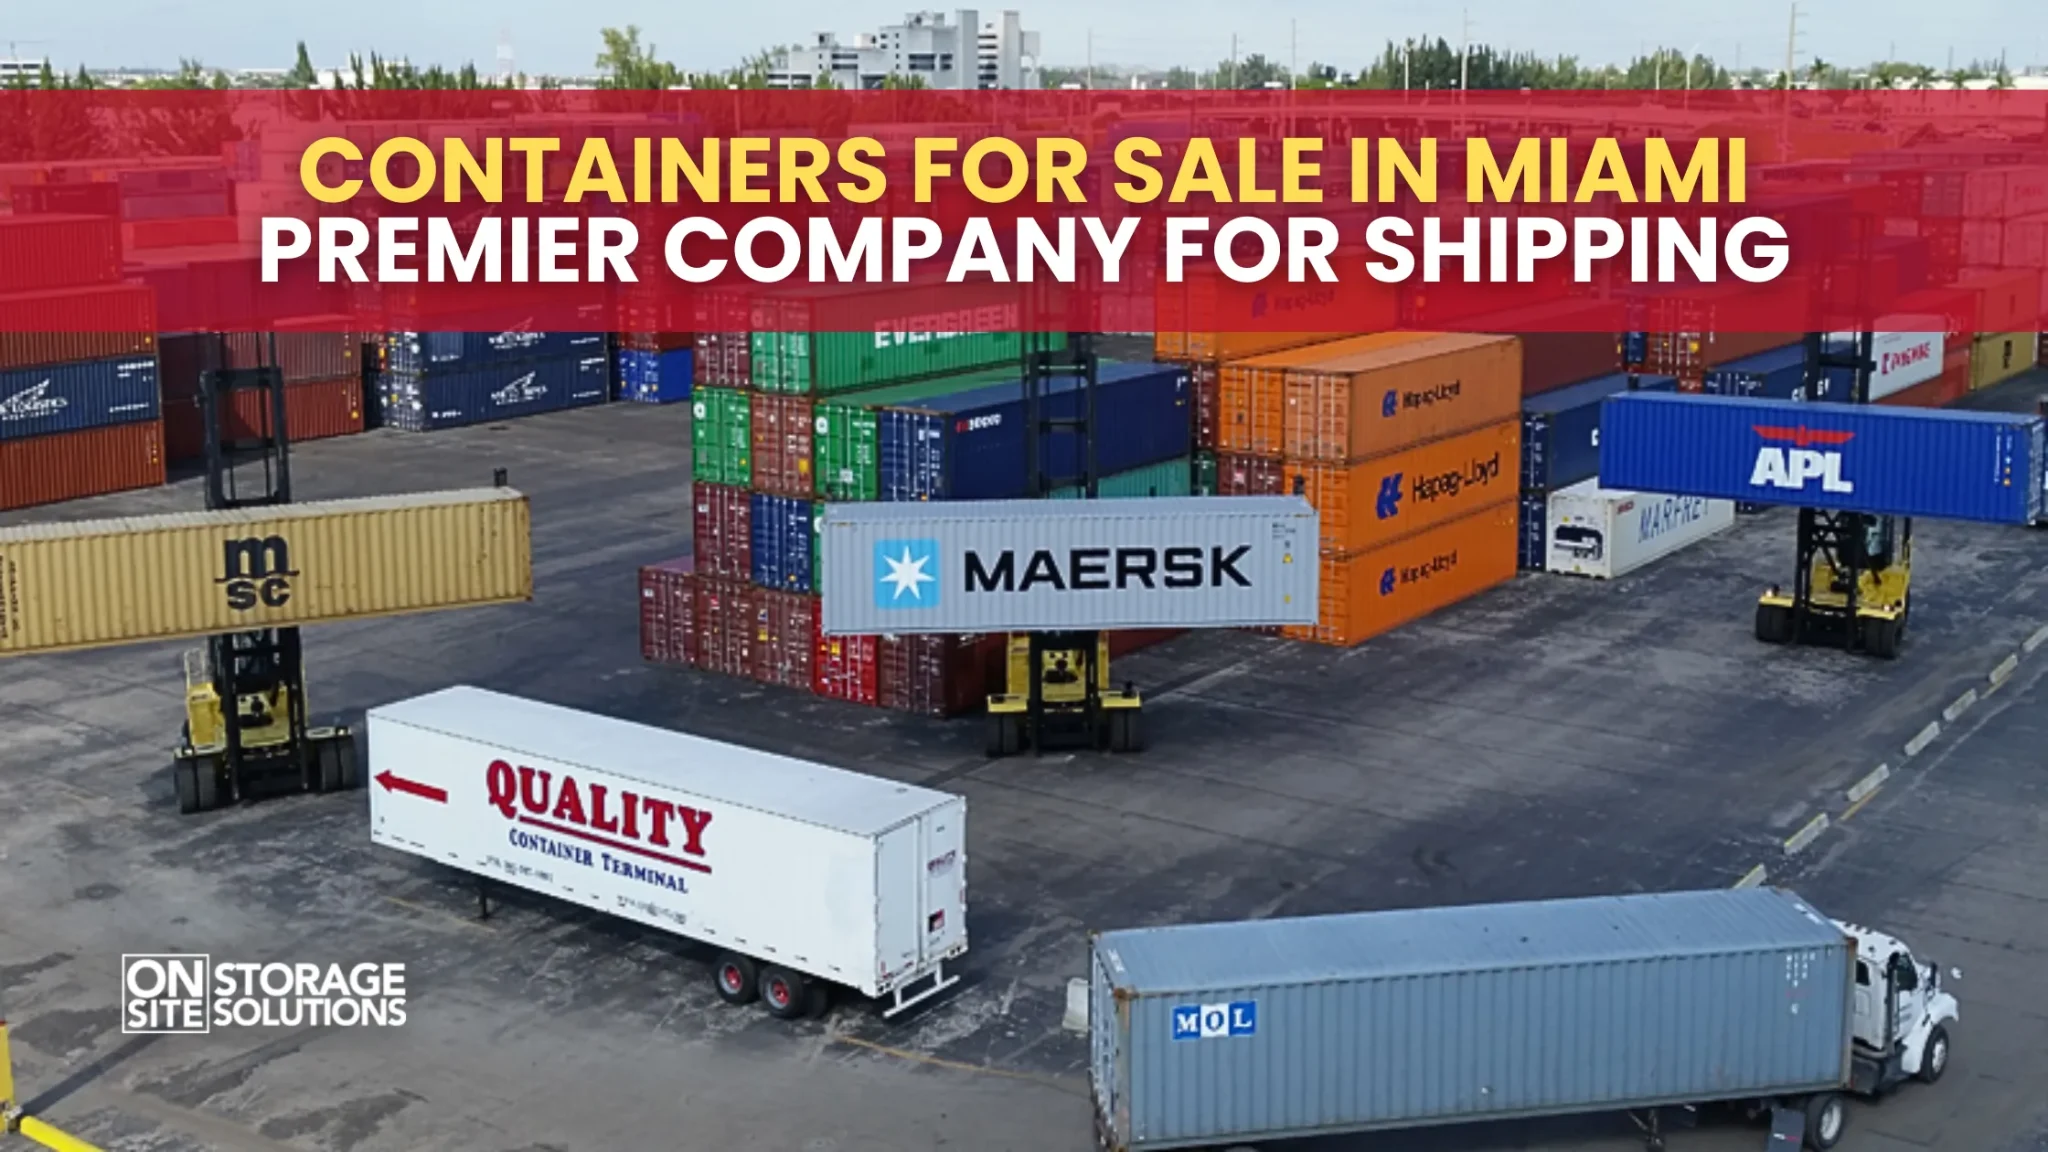 Premier Company for Shipping Containers for Sale in Miami